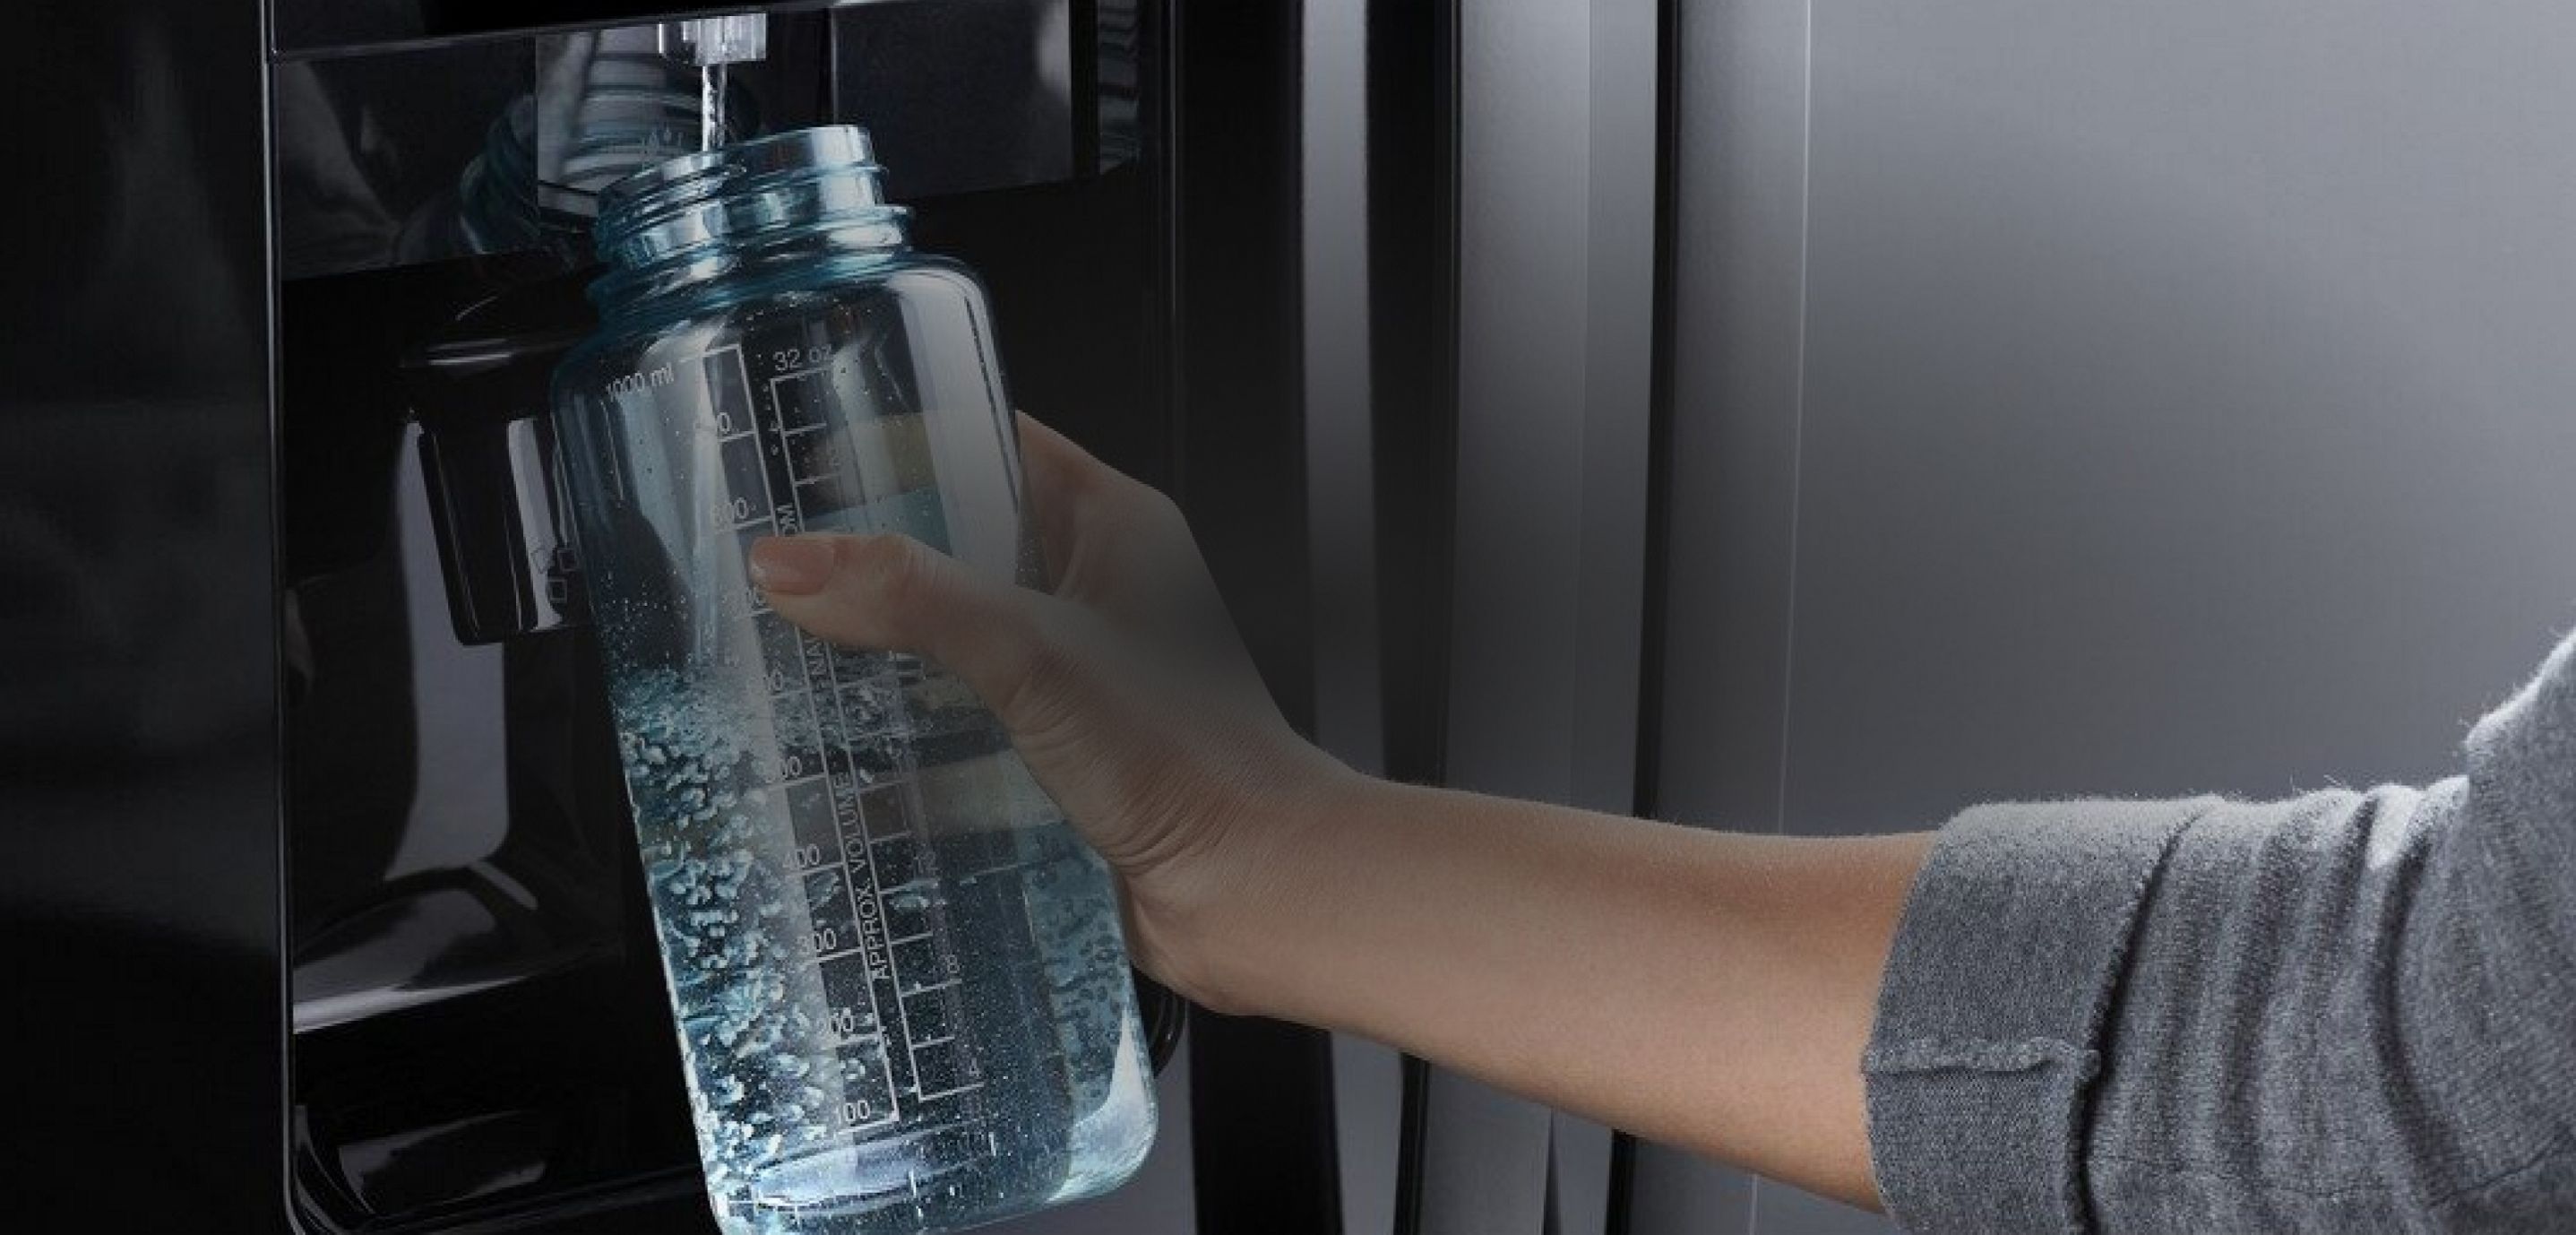 Person filling a reusable water bottle from the fridge